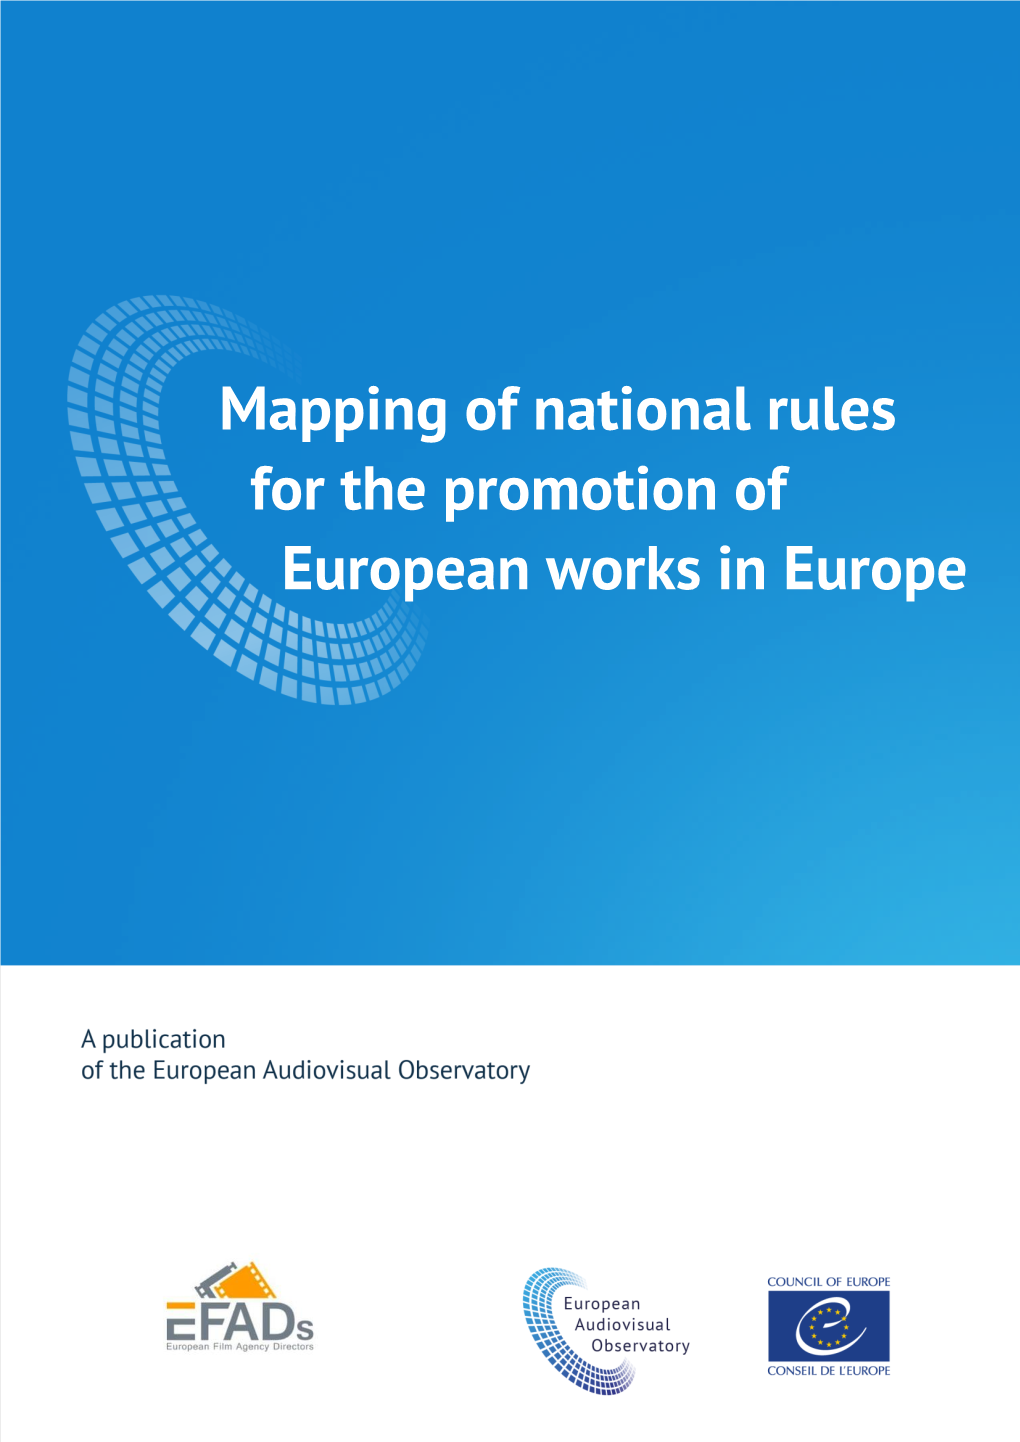 Mapping of National Rules for the Promotion of European Works in Europe